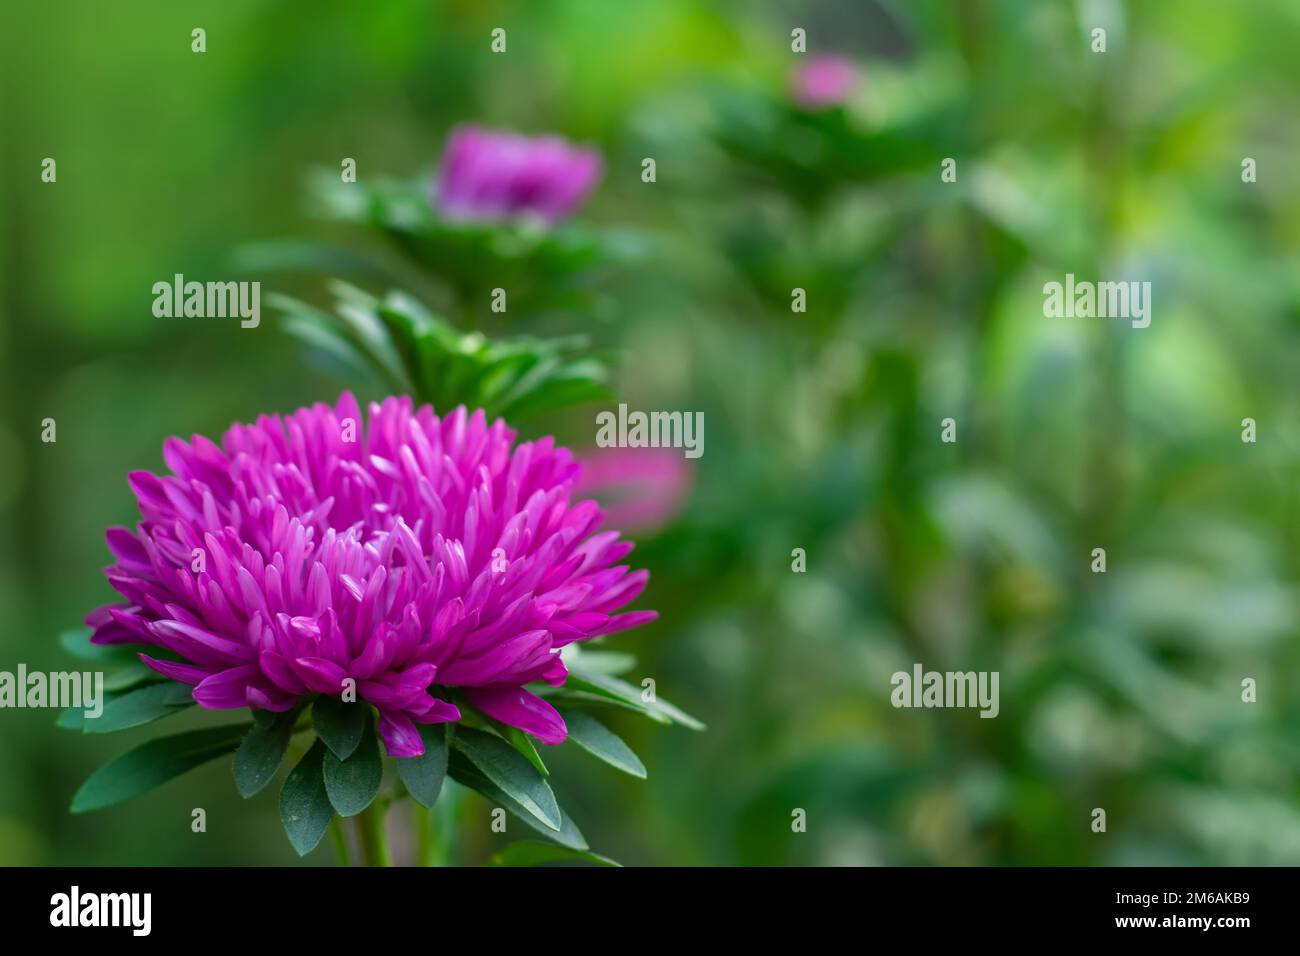 Blooming aster of rich purple color in the garden. Aster Flowers. High quality photo. Stock Photo